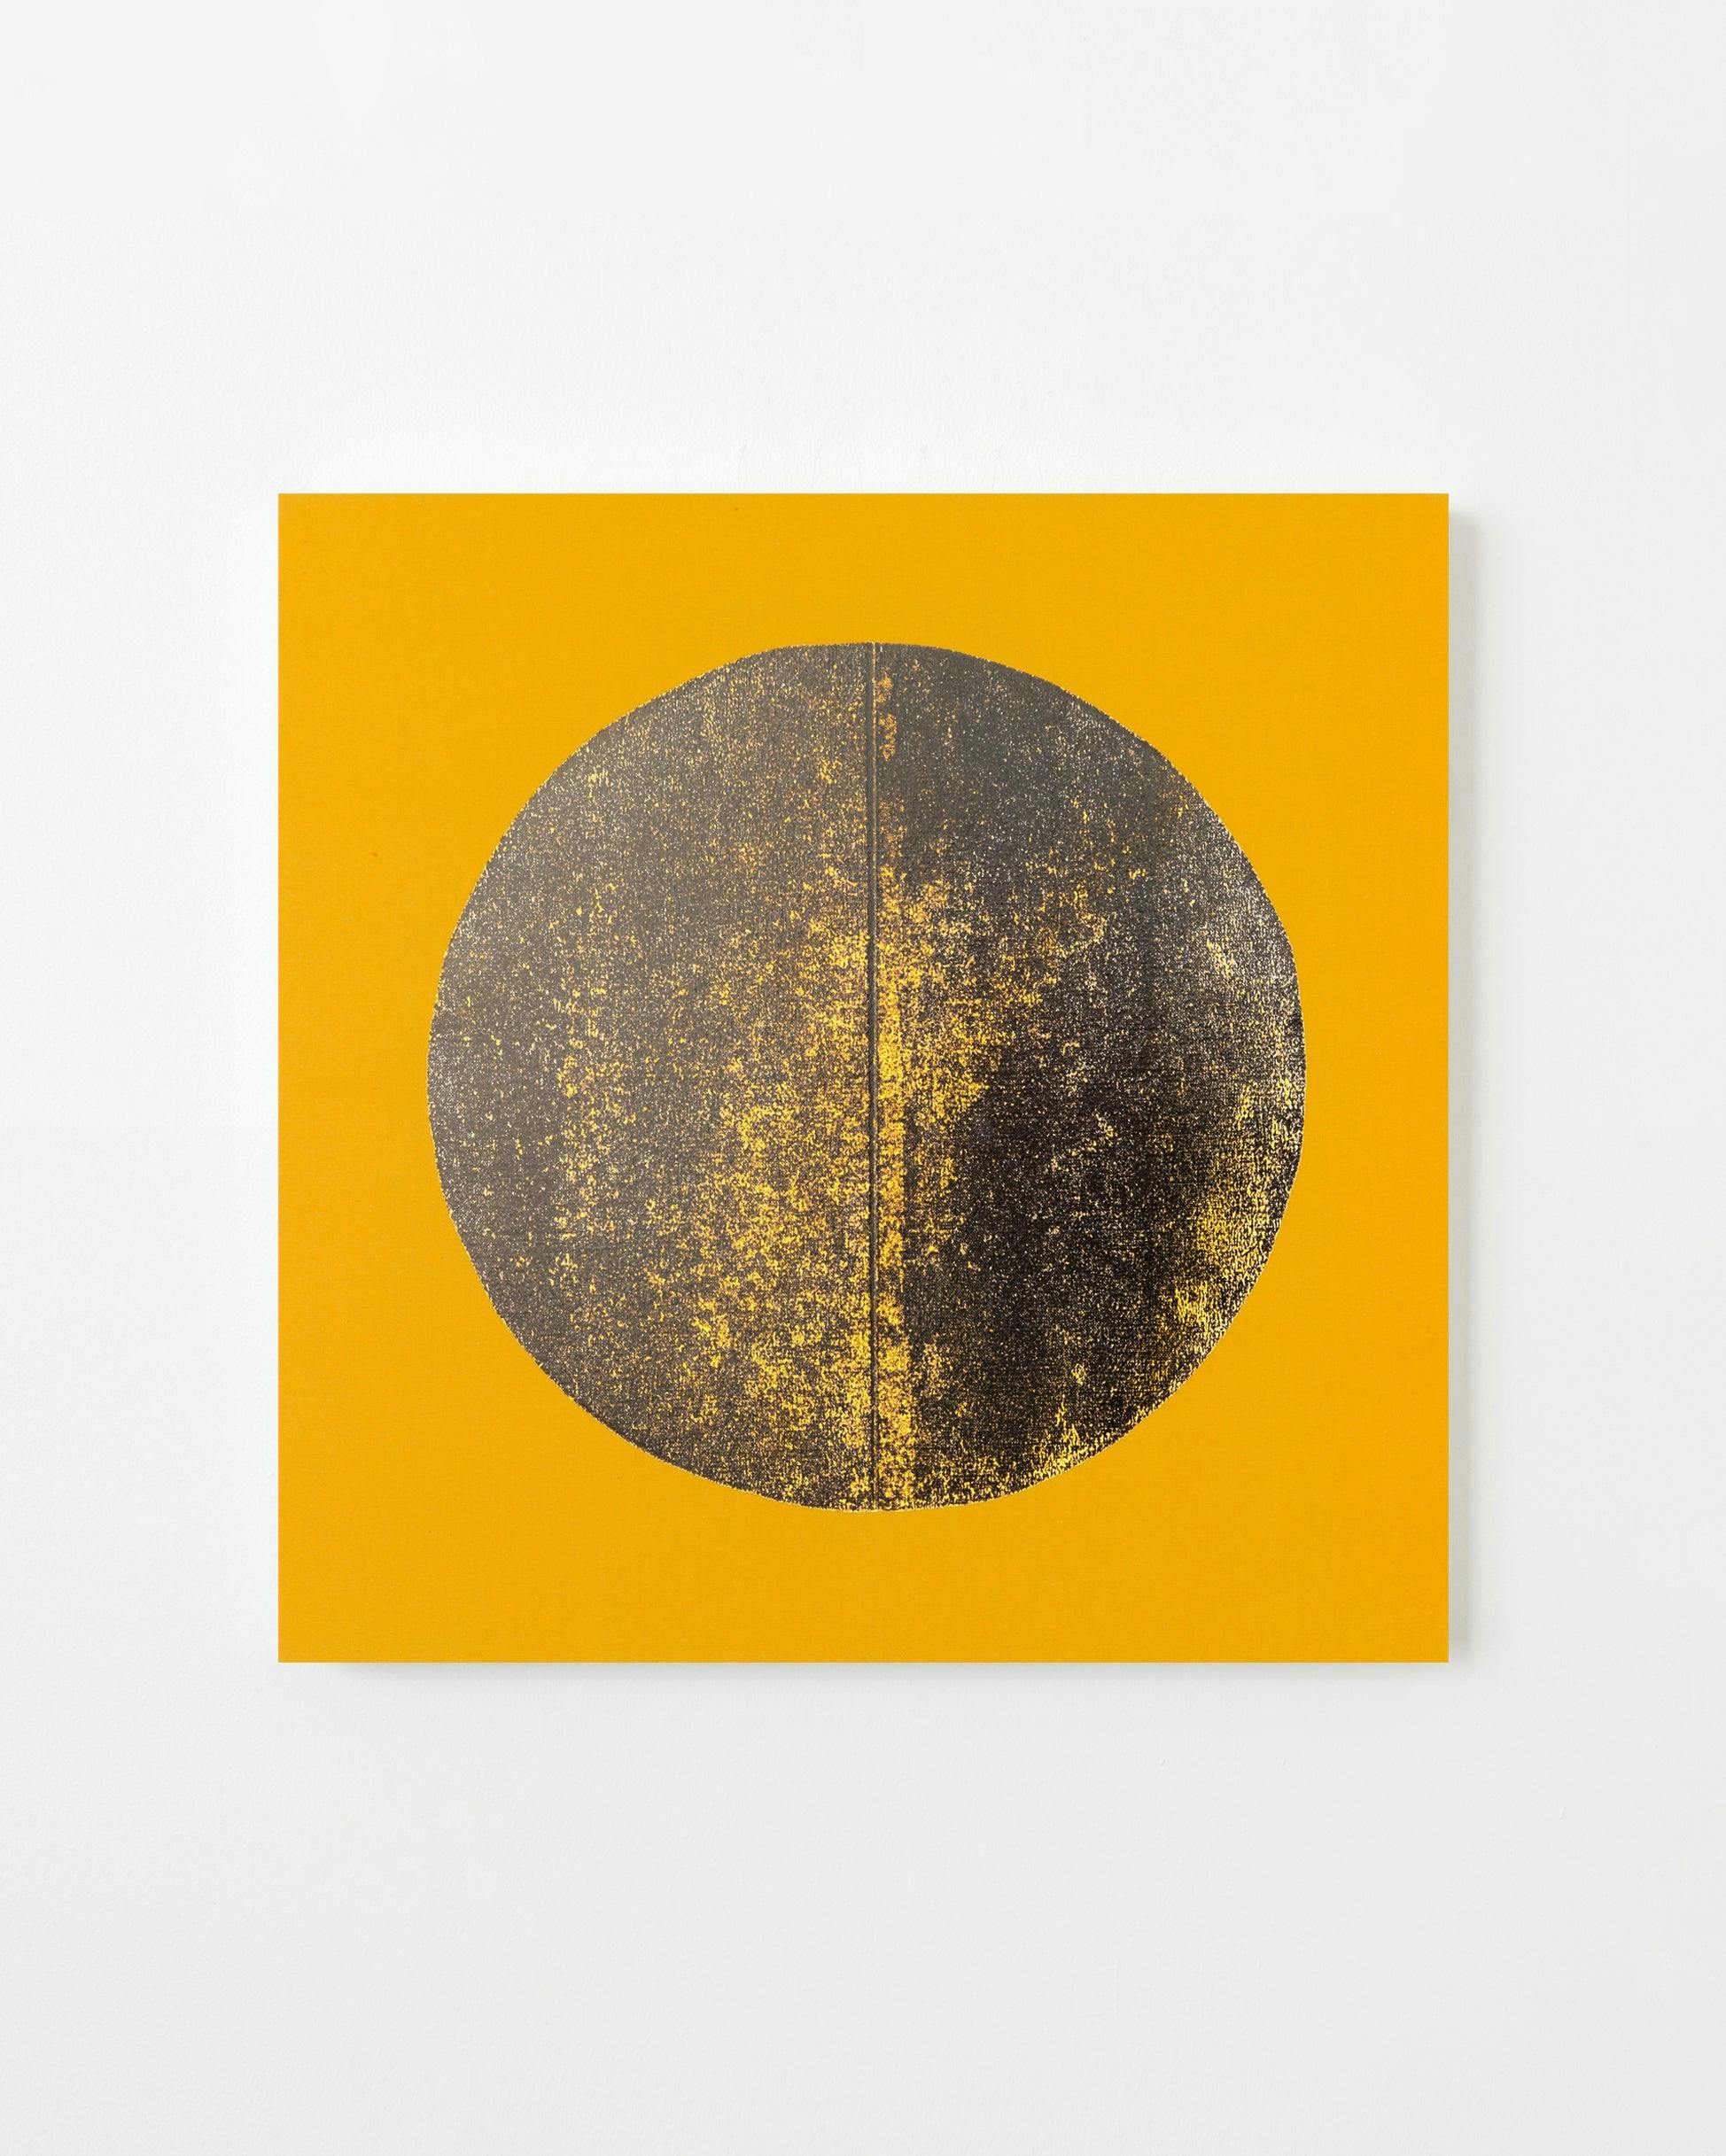 Painting by Chad Kouri titled "Reflection Pool Yellow (2x2)".